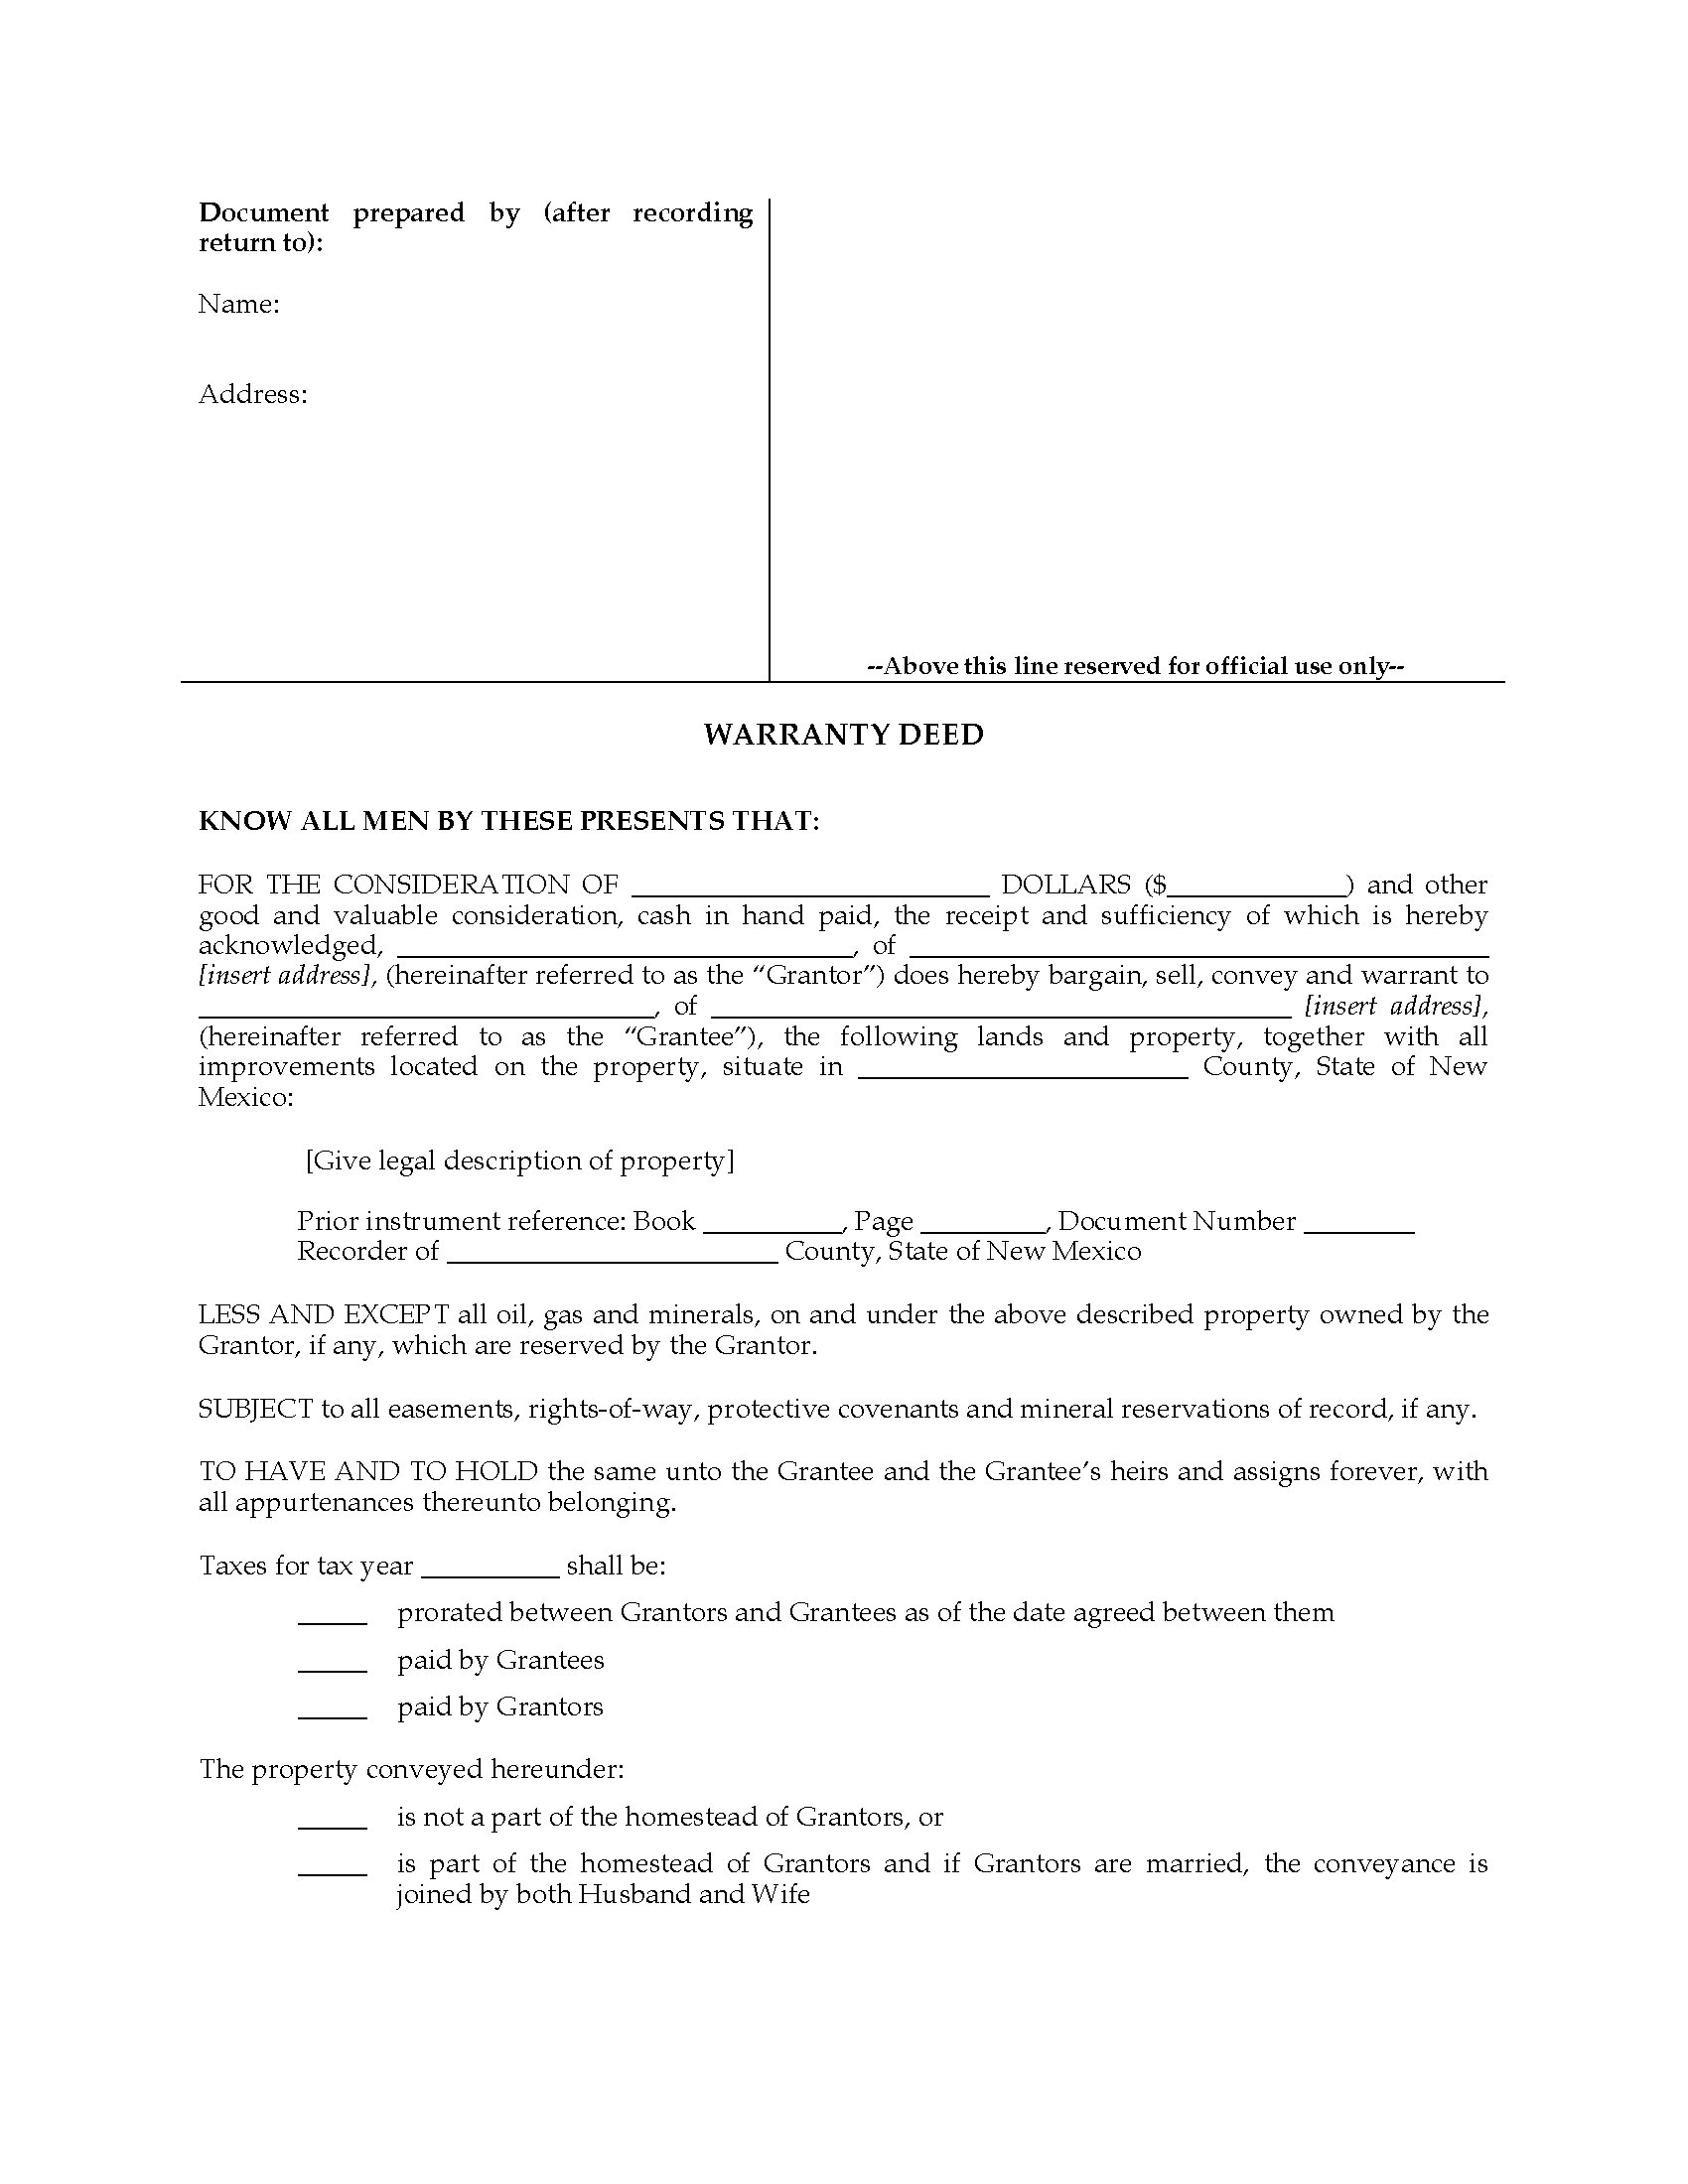 New Mexico Warranty Deed Form Legal Forms And Business Templates Megadox Com